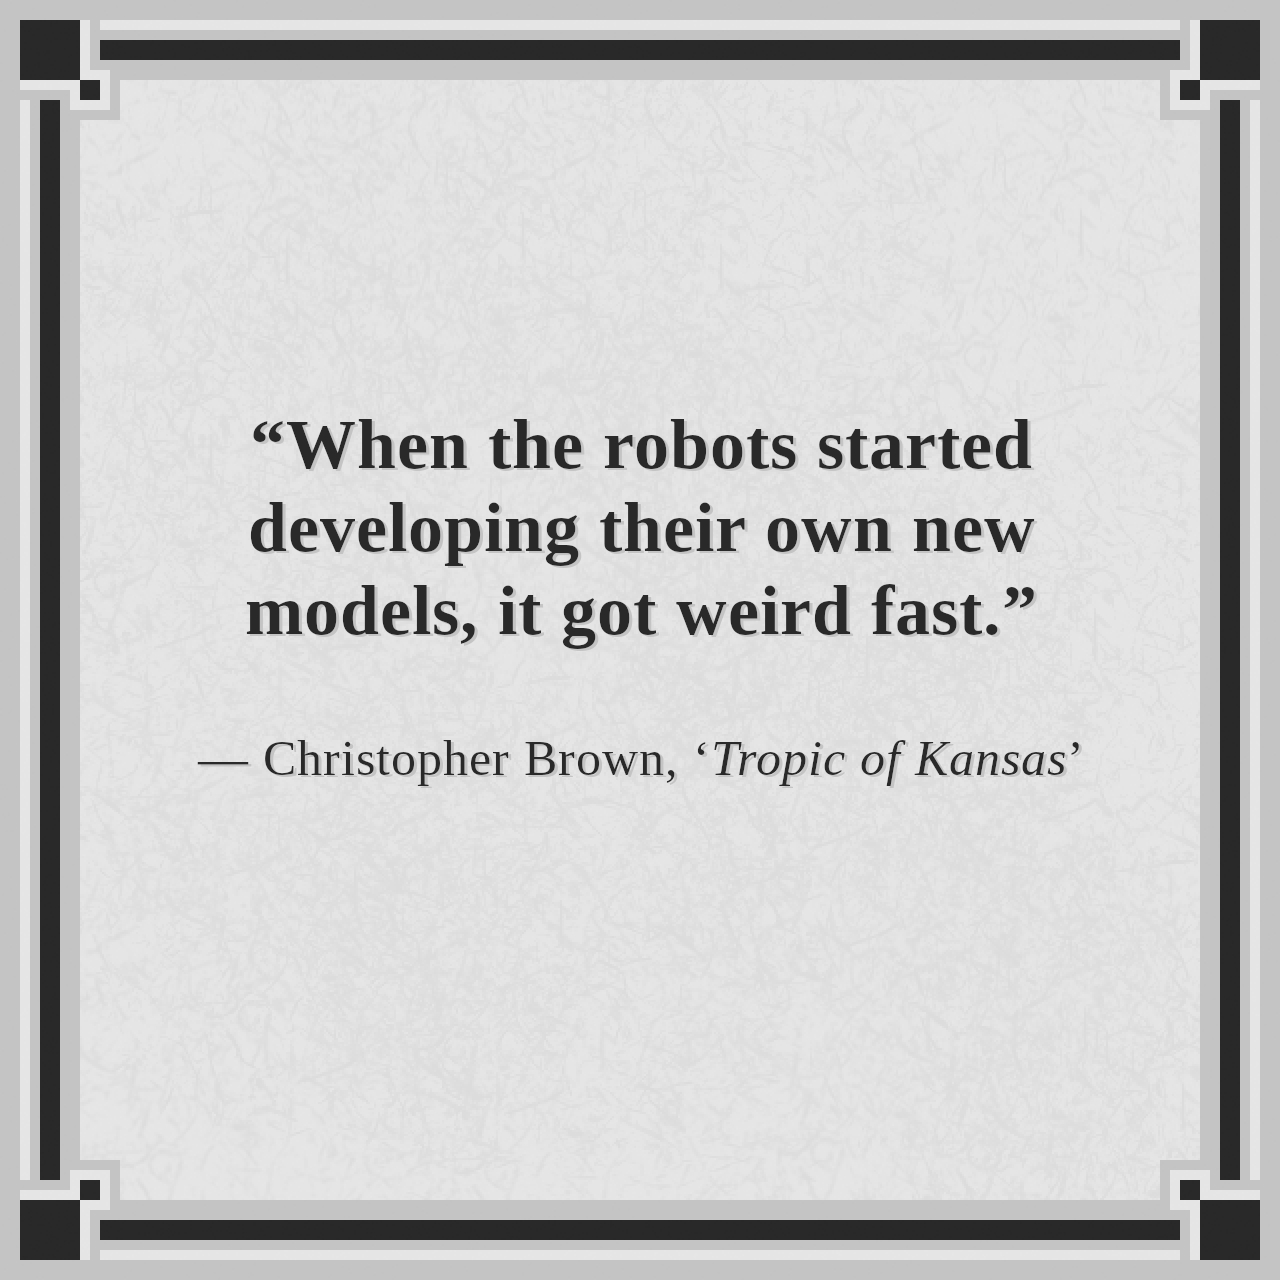 “When the robots started developing their own new models, it got weird fast.”

— Christopher Brown, ‘Tropic of Kansas’